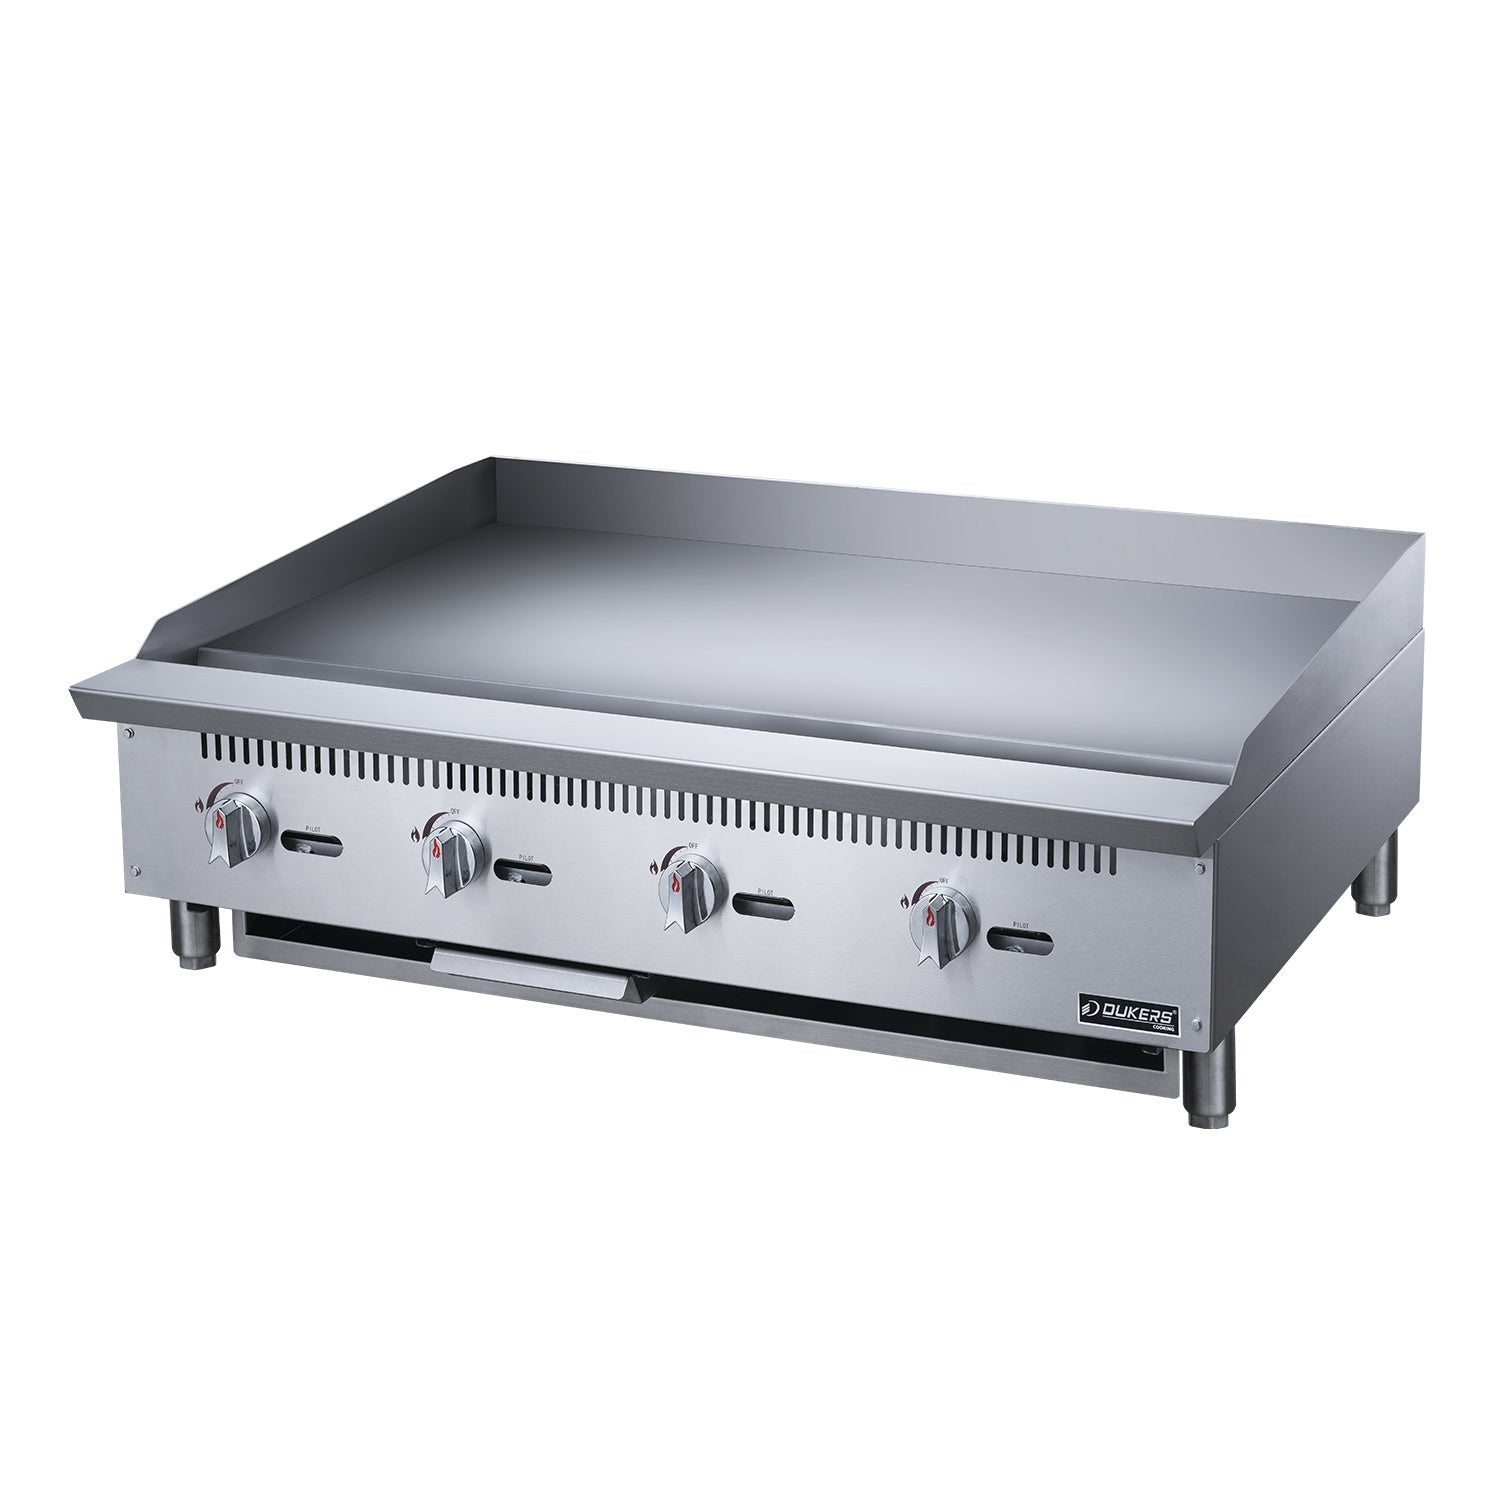 4-Burner Commercial Griddle in Stainless Steel with 4 legs, isolated on a white background.